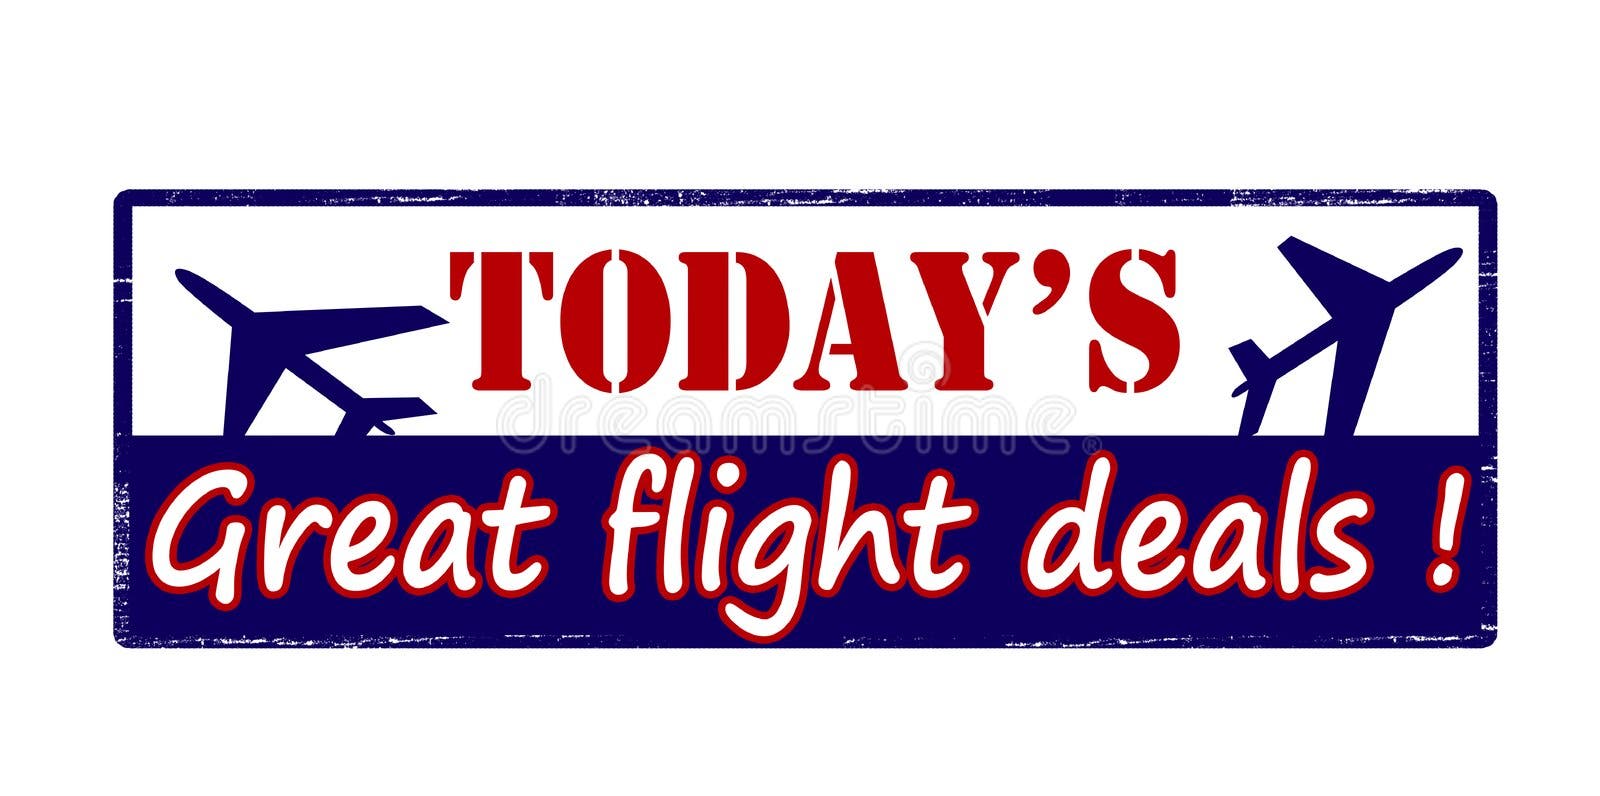 https://thumbs.dreamstime.com/b/today-great-flight-deals-rubber-stamp-text-inside-vector-illustration-82295581.jpg?w=1600